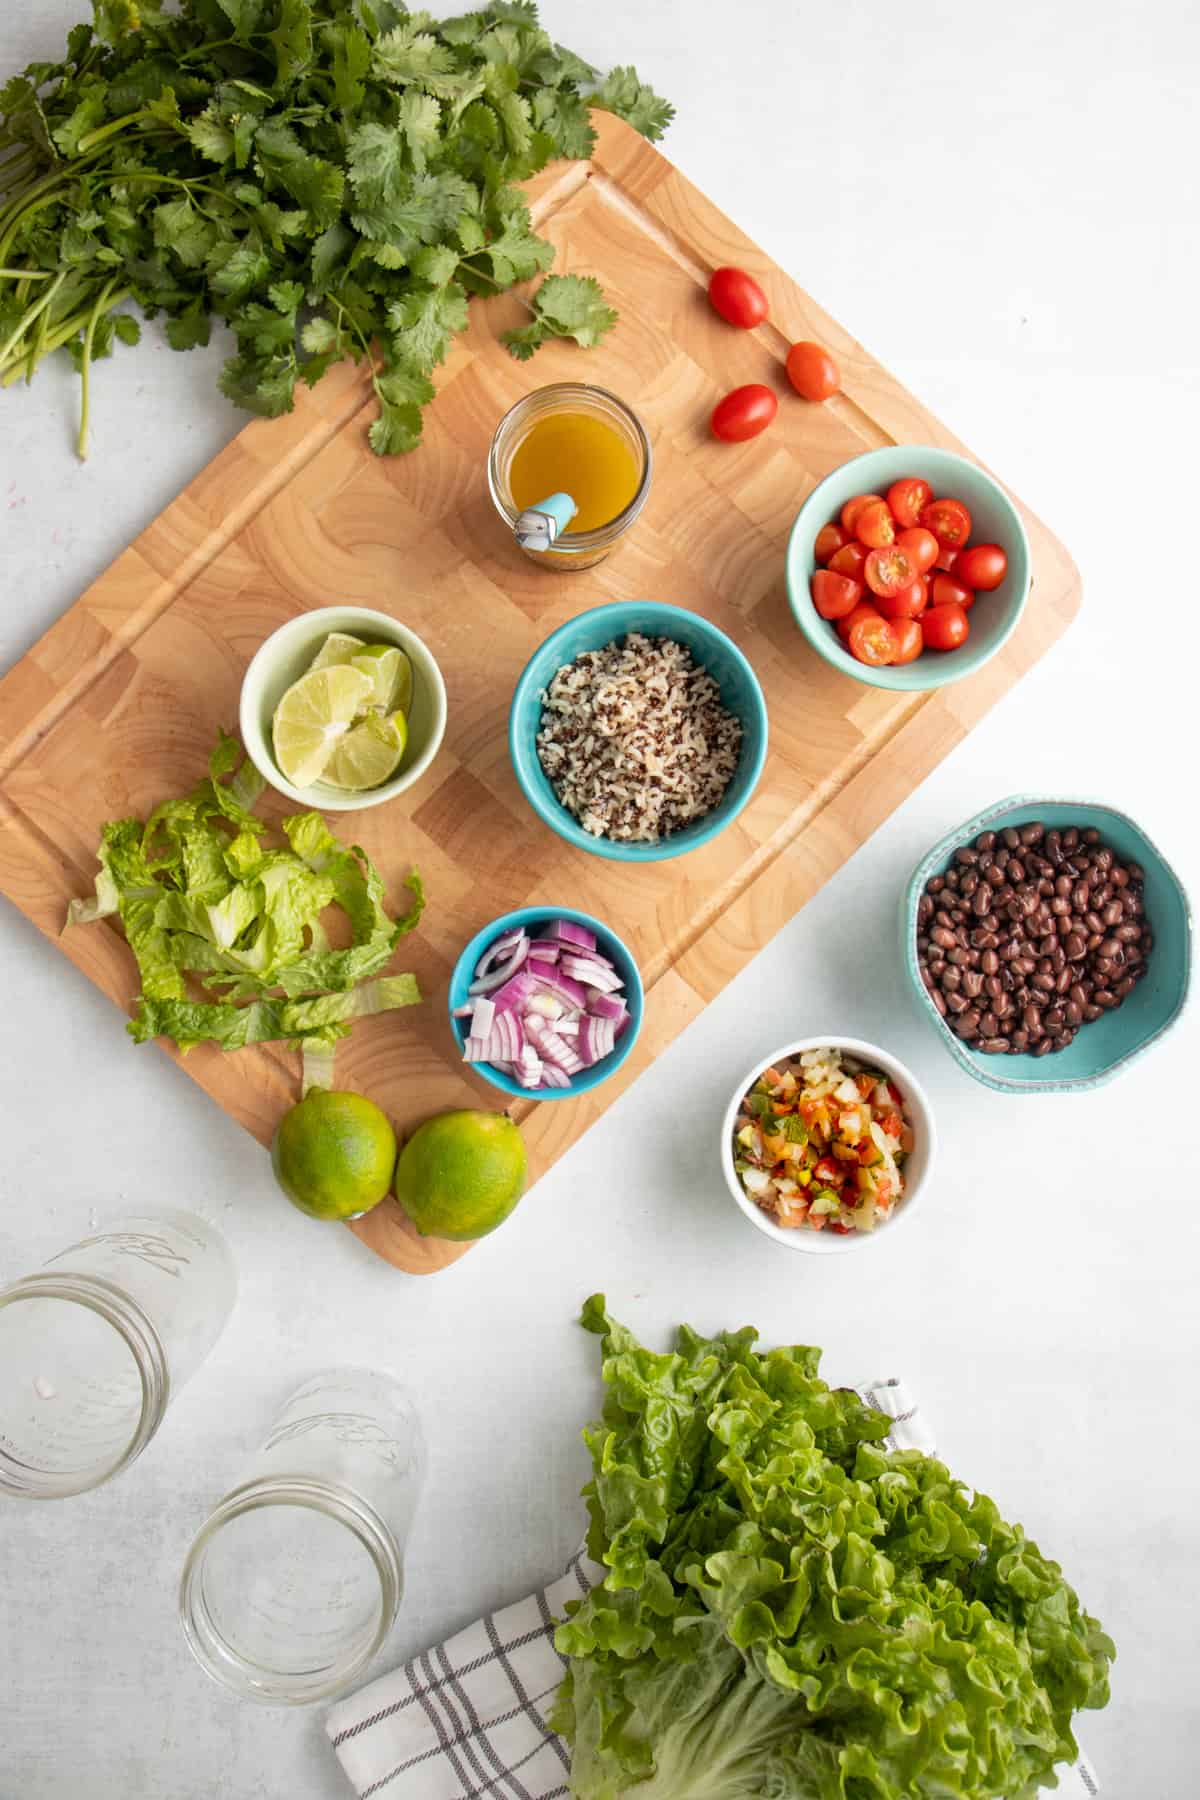 Ingredients for black bean fiesta salad are in blue bowls. Bowls are sitting on a wooden cutting board and a white countertop. Two empty jars and lettuce are on the counter.